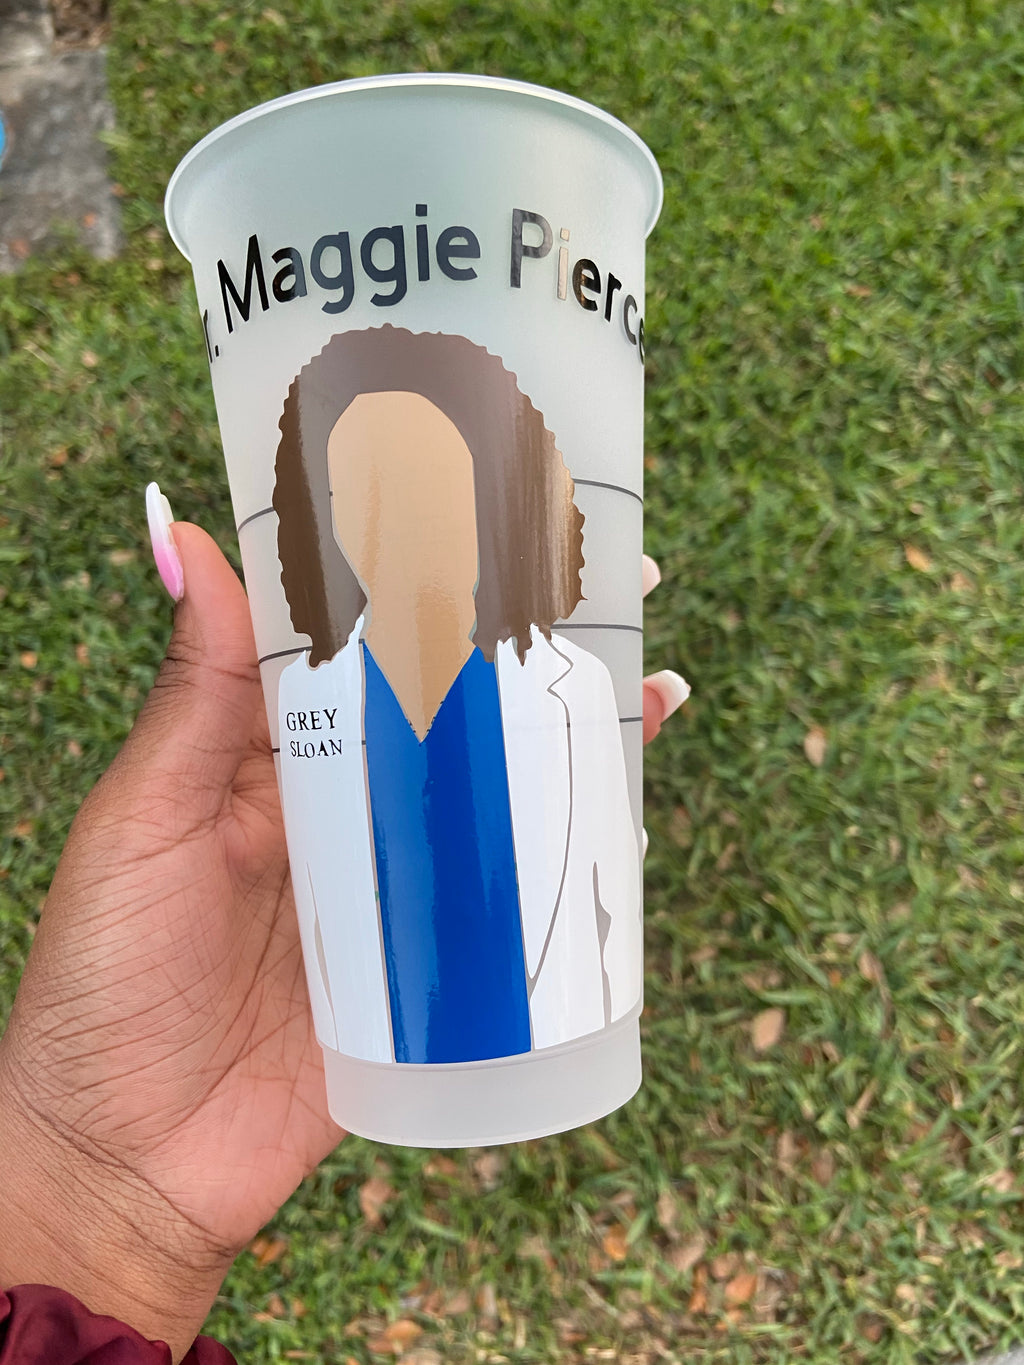 Grey’s Anatomy: Maggie Pierce Cold Cup - HPK Personalized Products and more